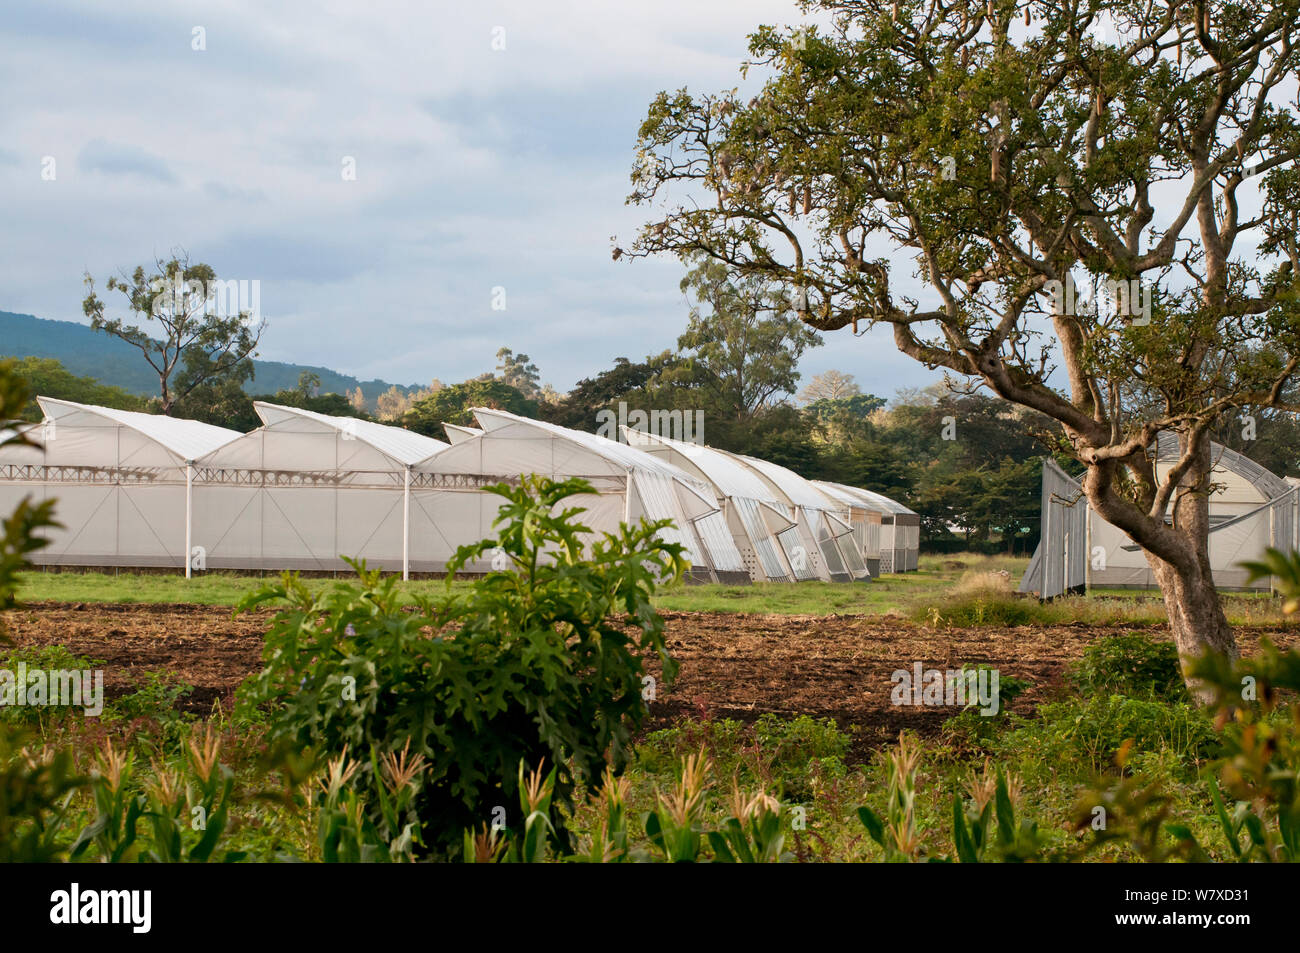 Greenhouses where Roses and Chives are grown commercially, Tanzania, East Africa. Stock Photo